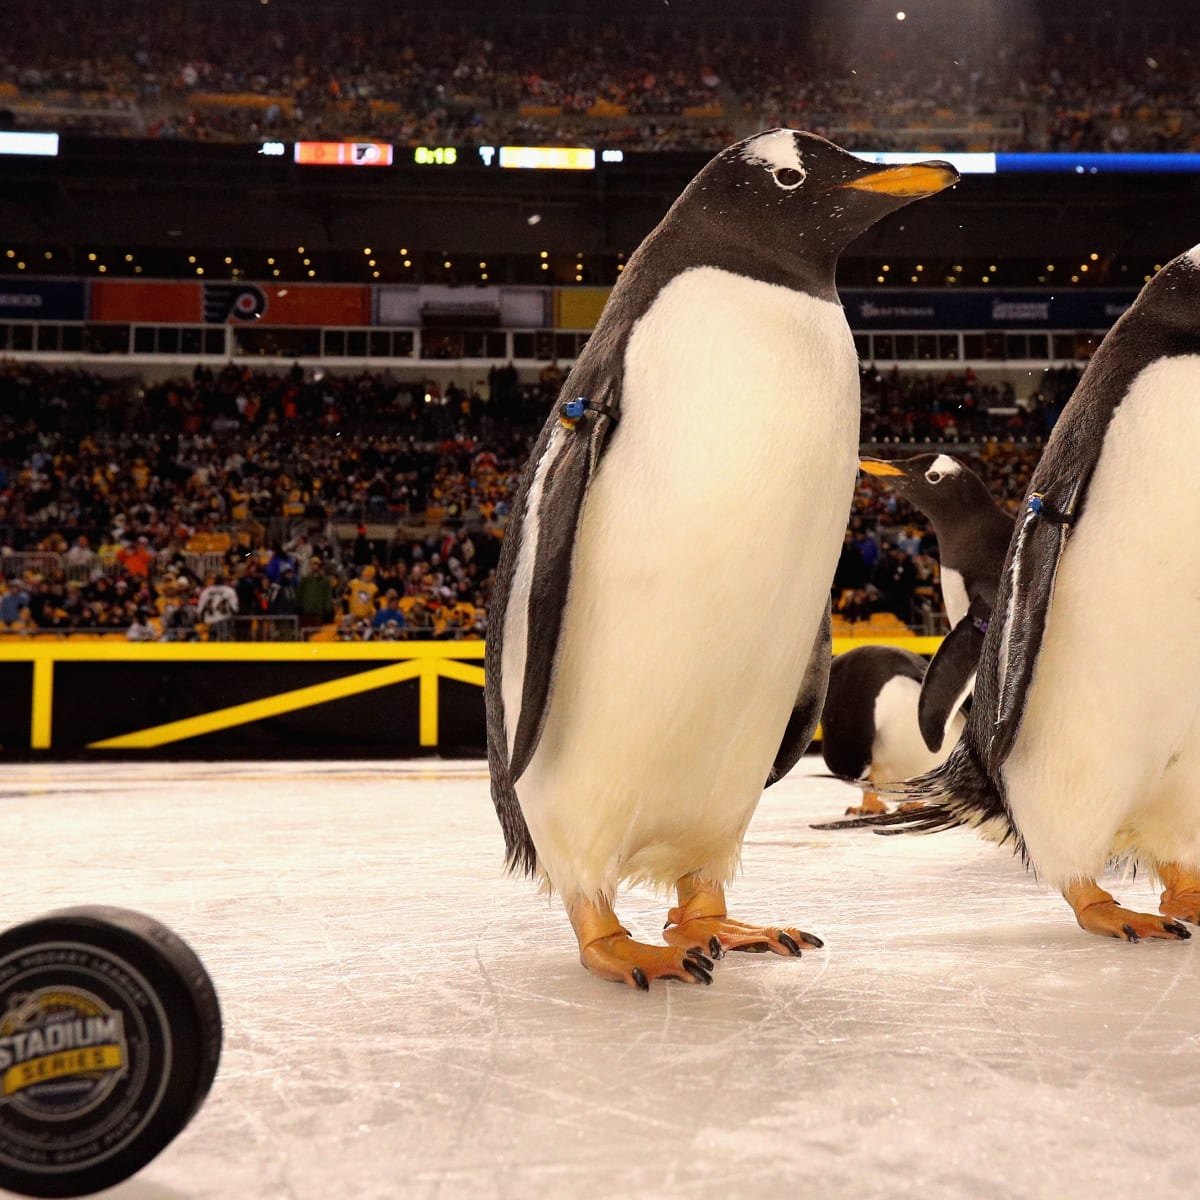 PETA Condemns N.H.L.'s Use of Real Penguins in Pittsburgh Pregame